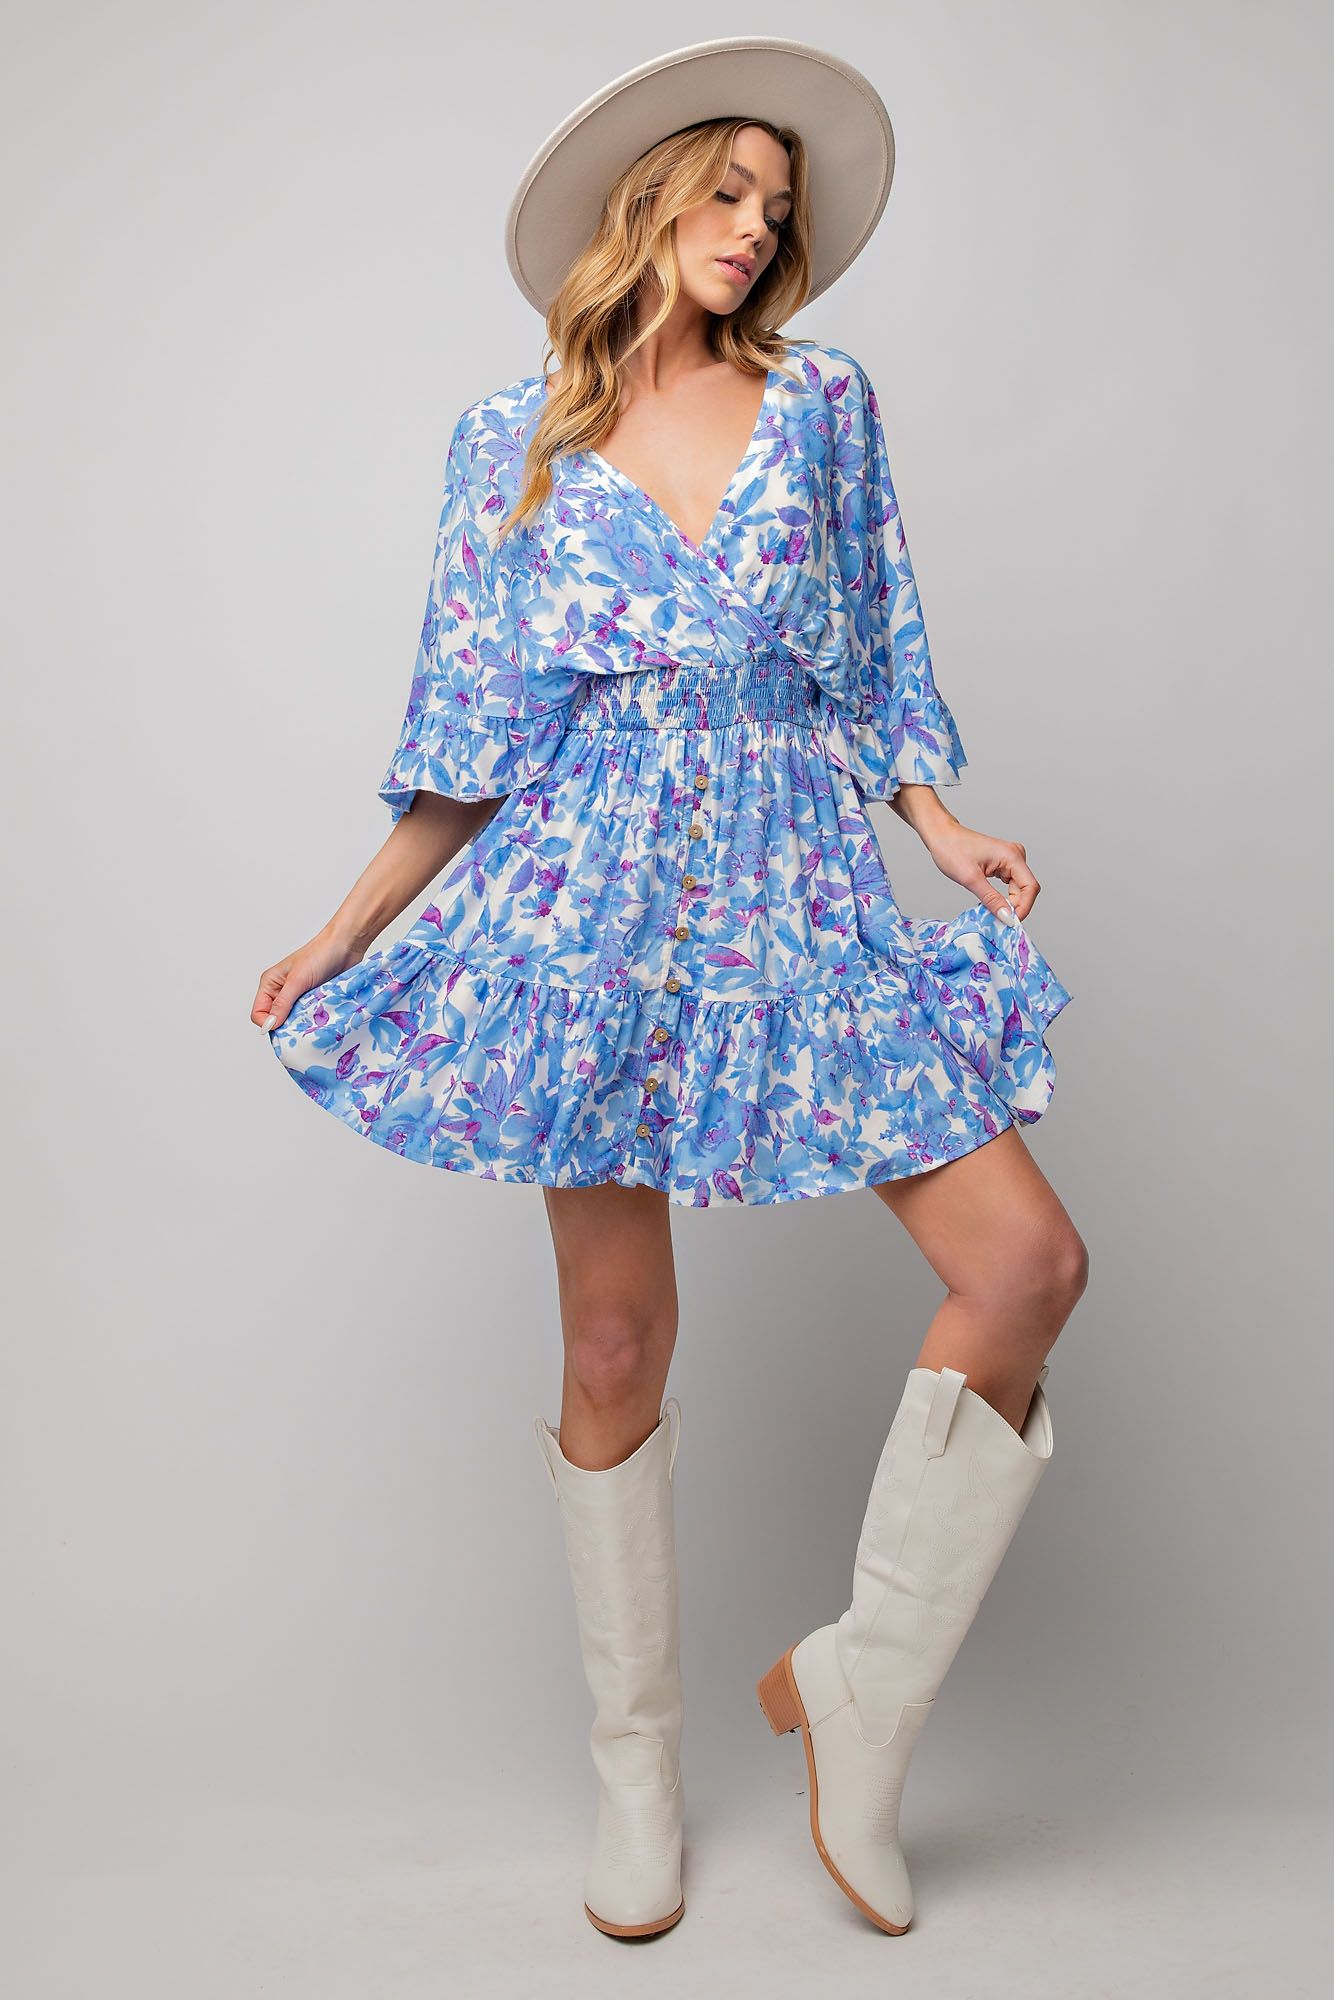 NEW -  Easel BLUE & PURPLE Floral Challis Ruffle Wing Sleeve Dress!